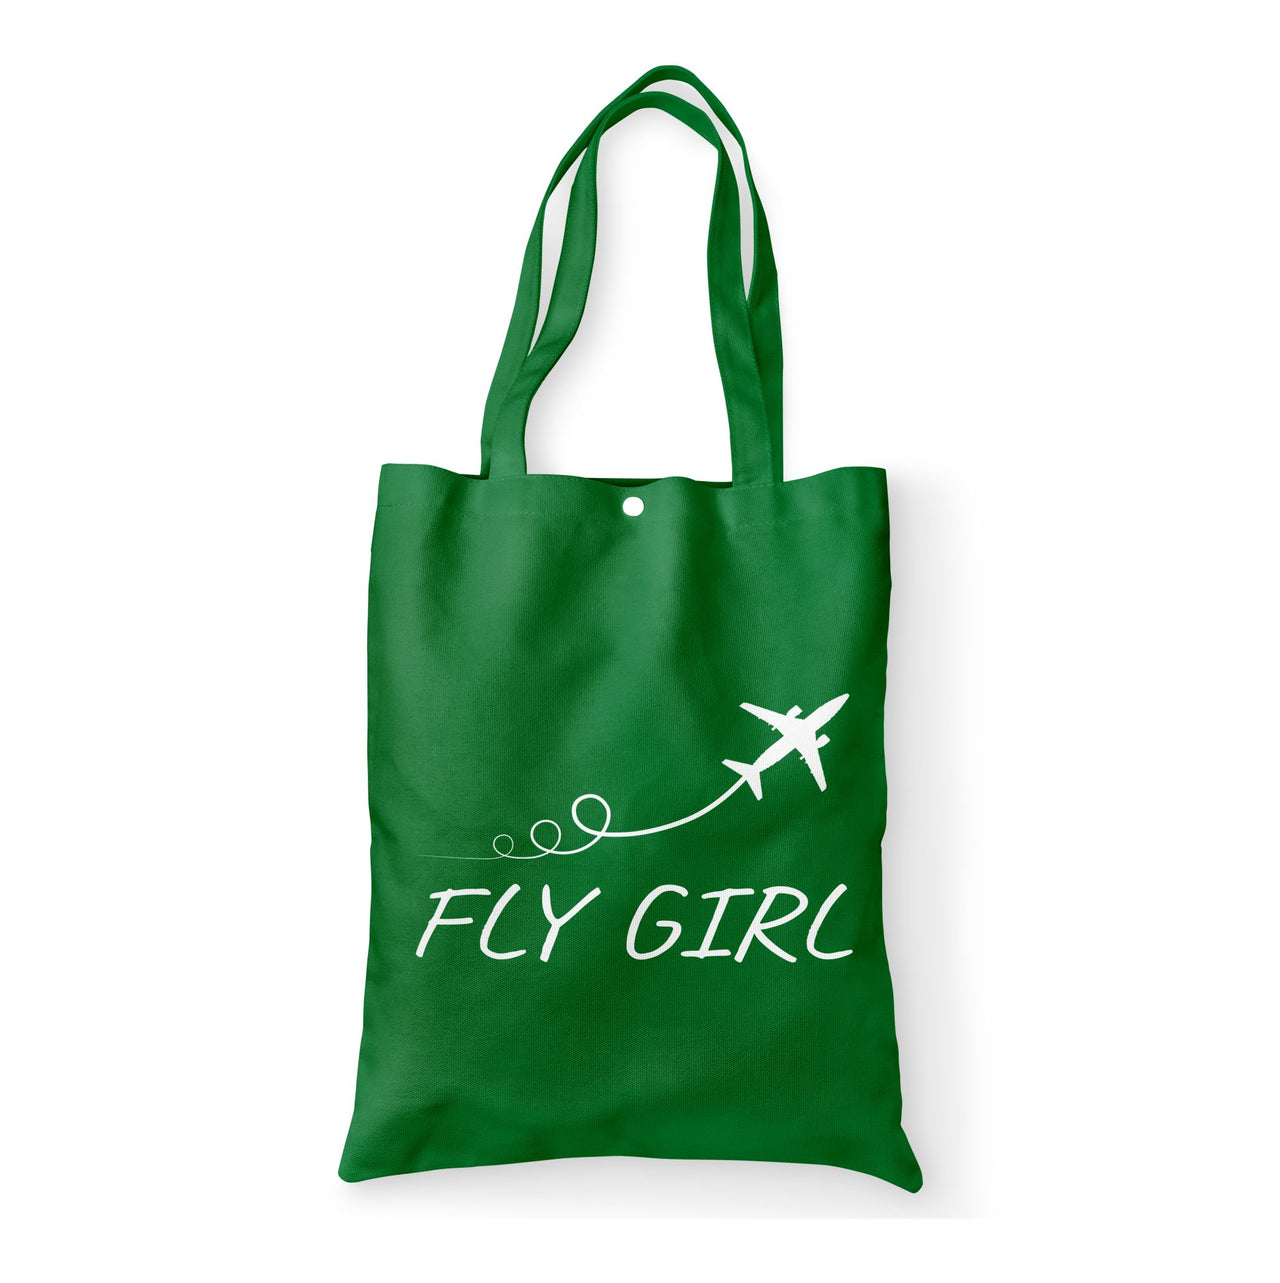 Just Fly It & Fly Girl Designed Tote Bags